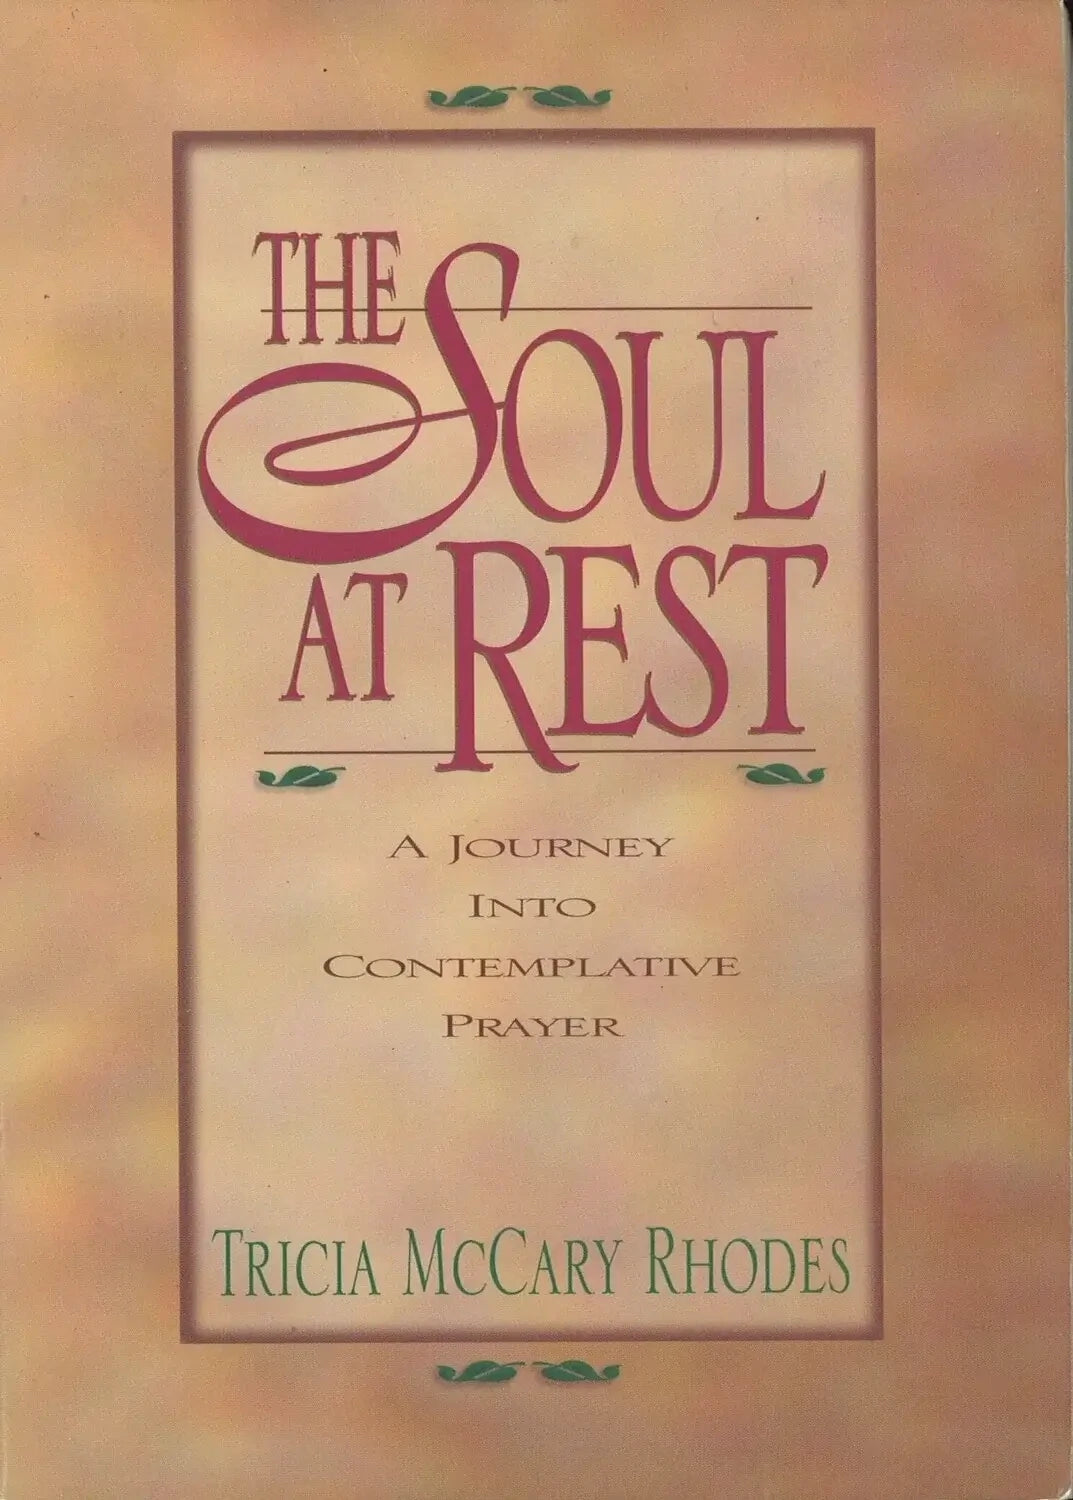 The Soul At Rest by Tricia McCary Rhodes